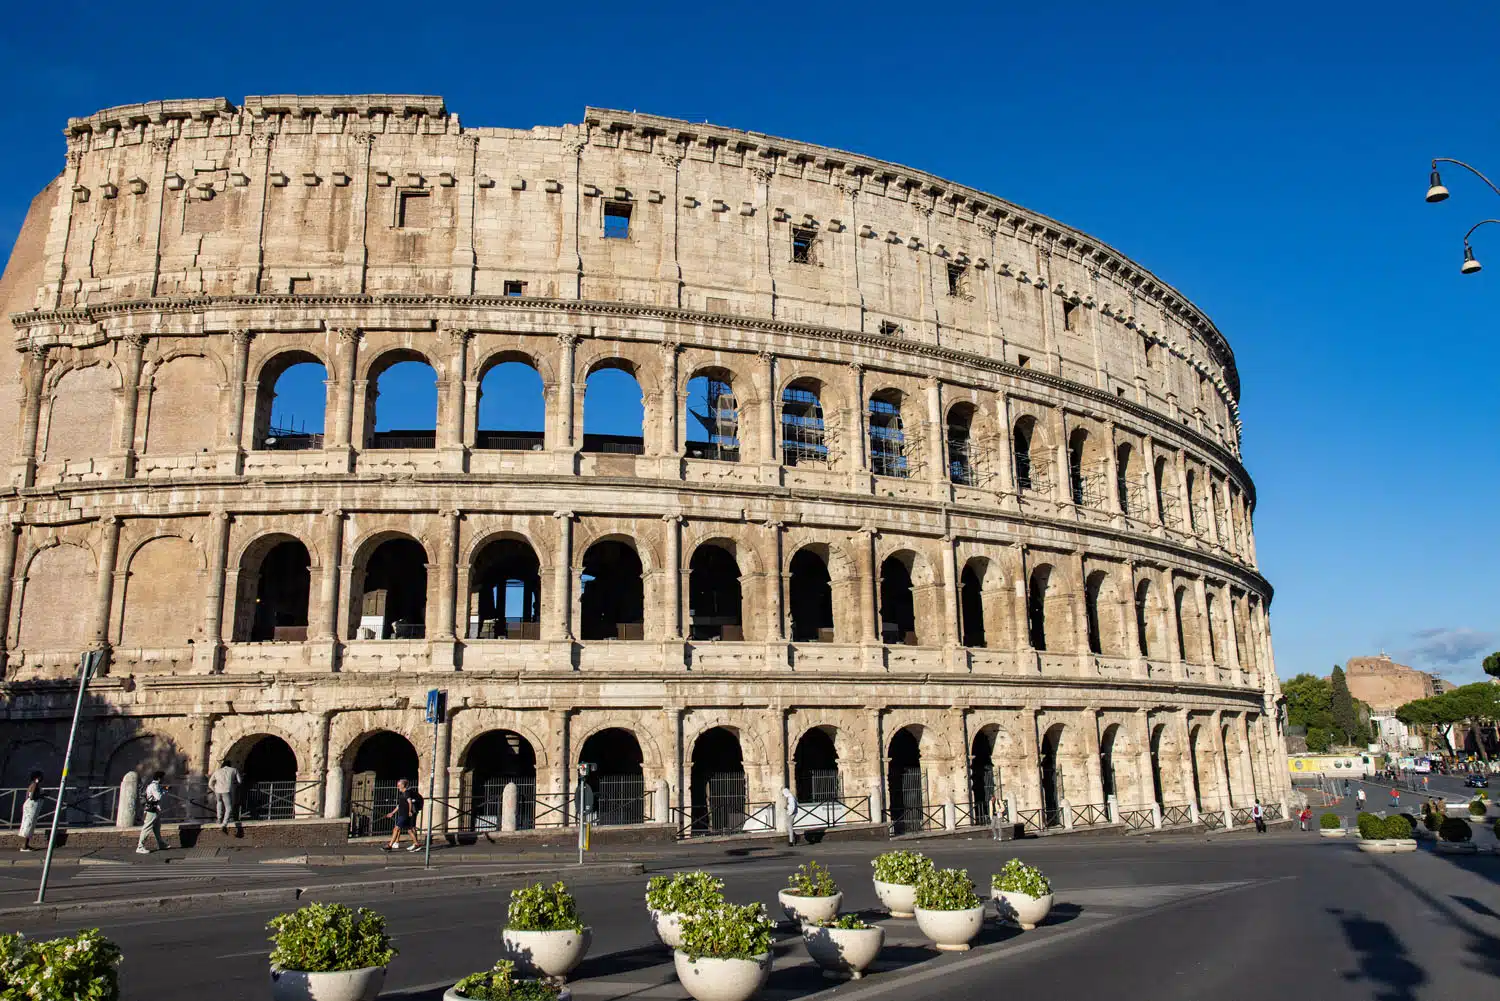 Views of the Colosseum | How to Visit the Colosseum